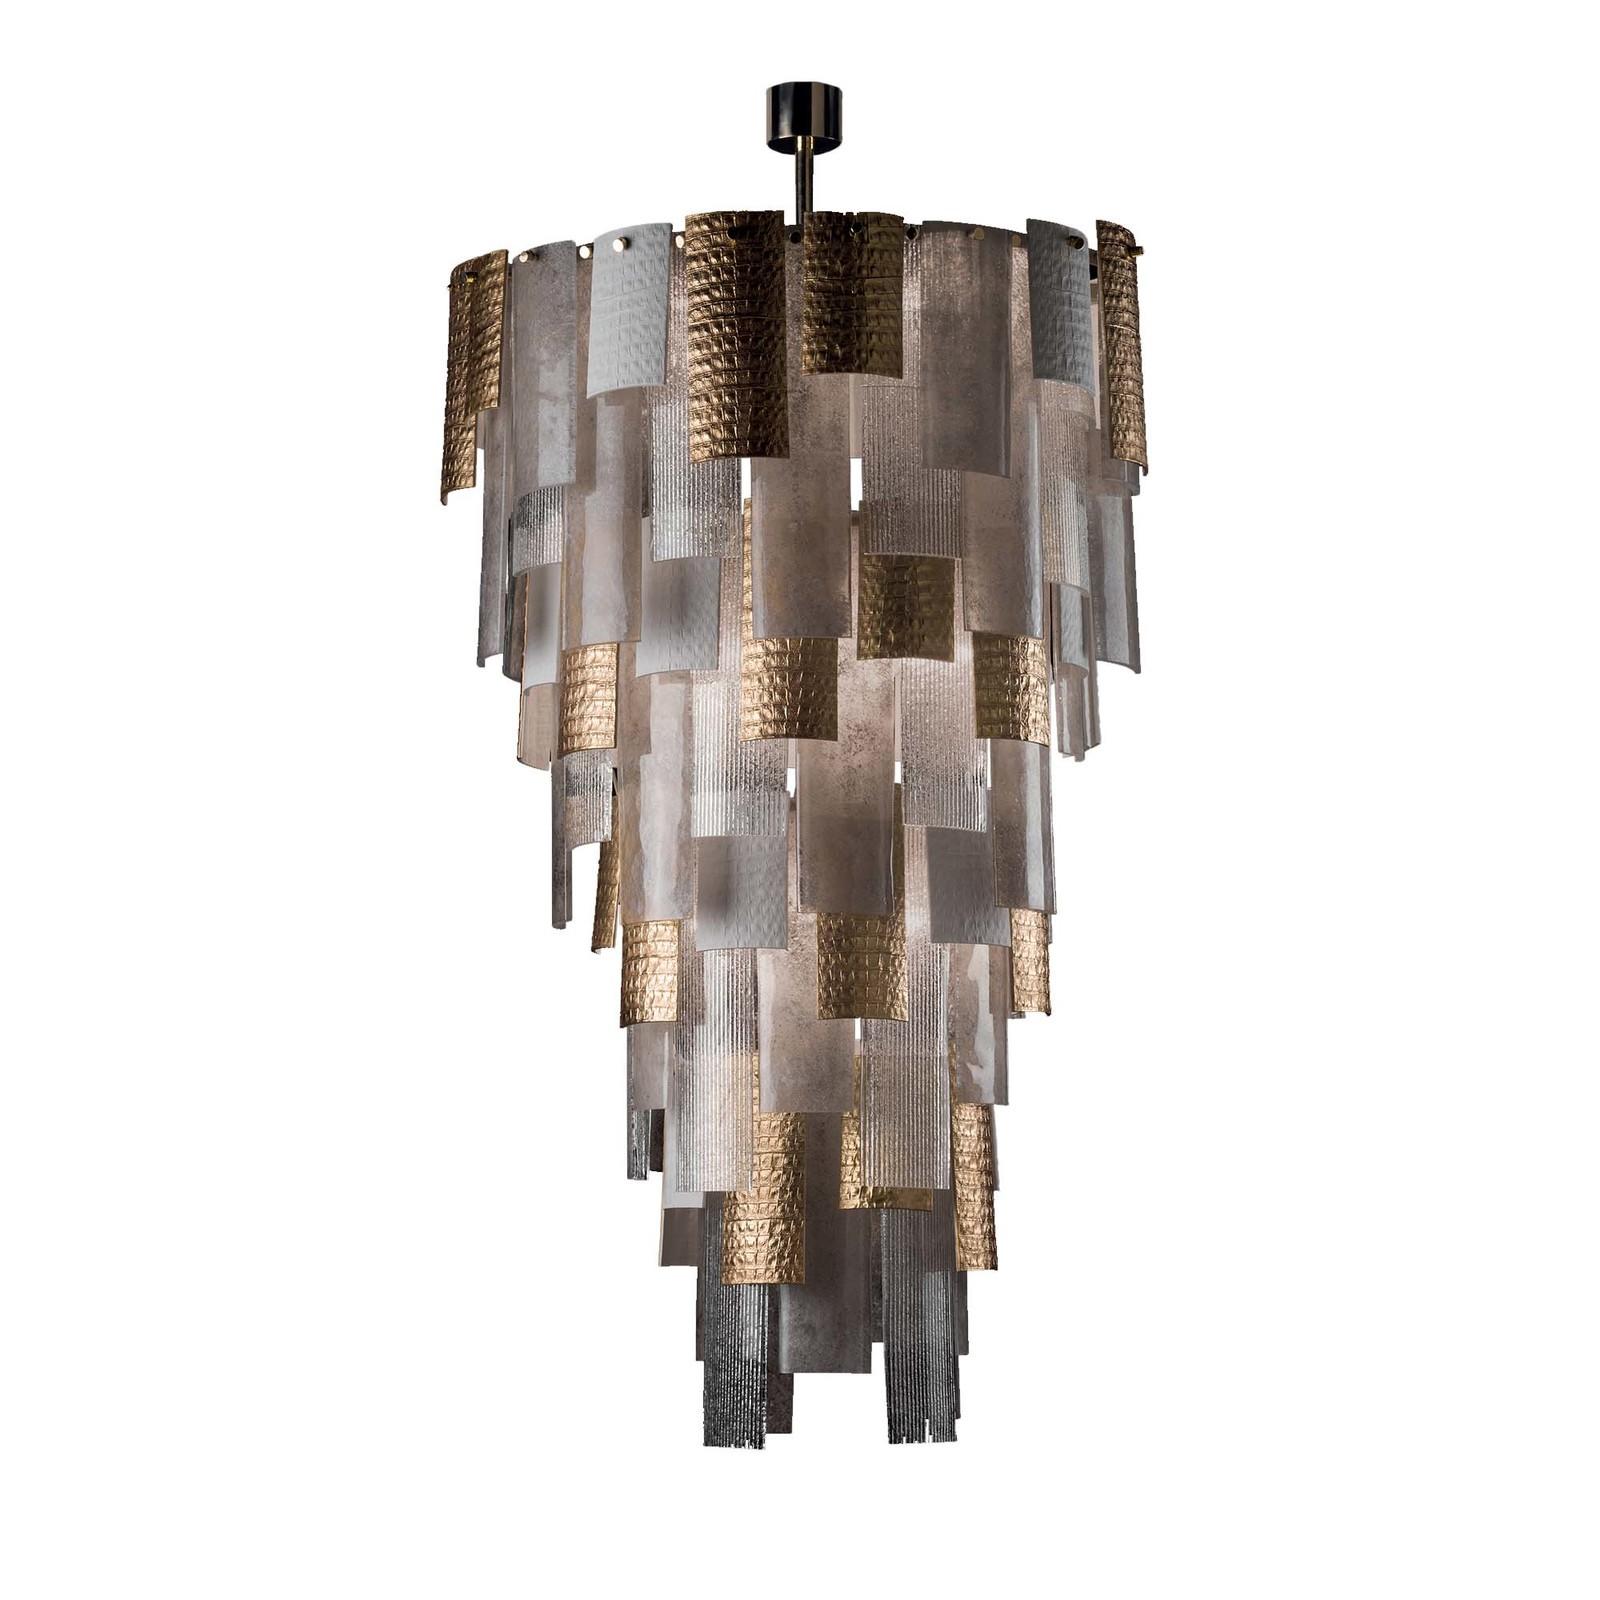 A superb sculpture that also functions as a chandelier, this stunning piece embodies Villari's traditional inspiration and exquisite manufacturing techniques. The structure in metal with a brass finish supports a cascade of metal and glass elements